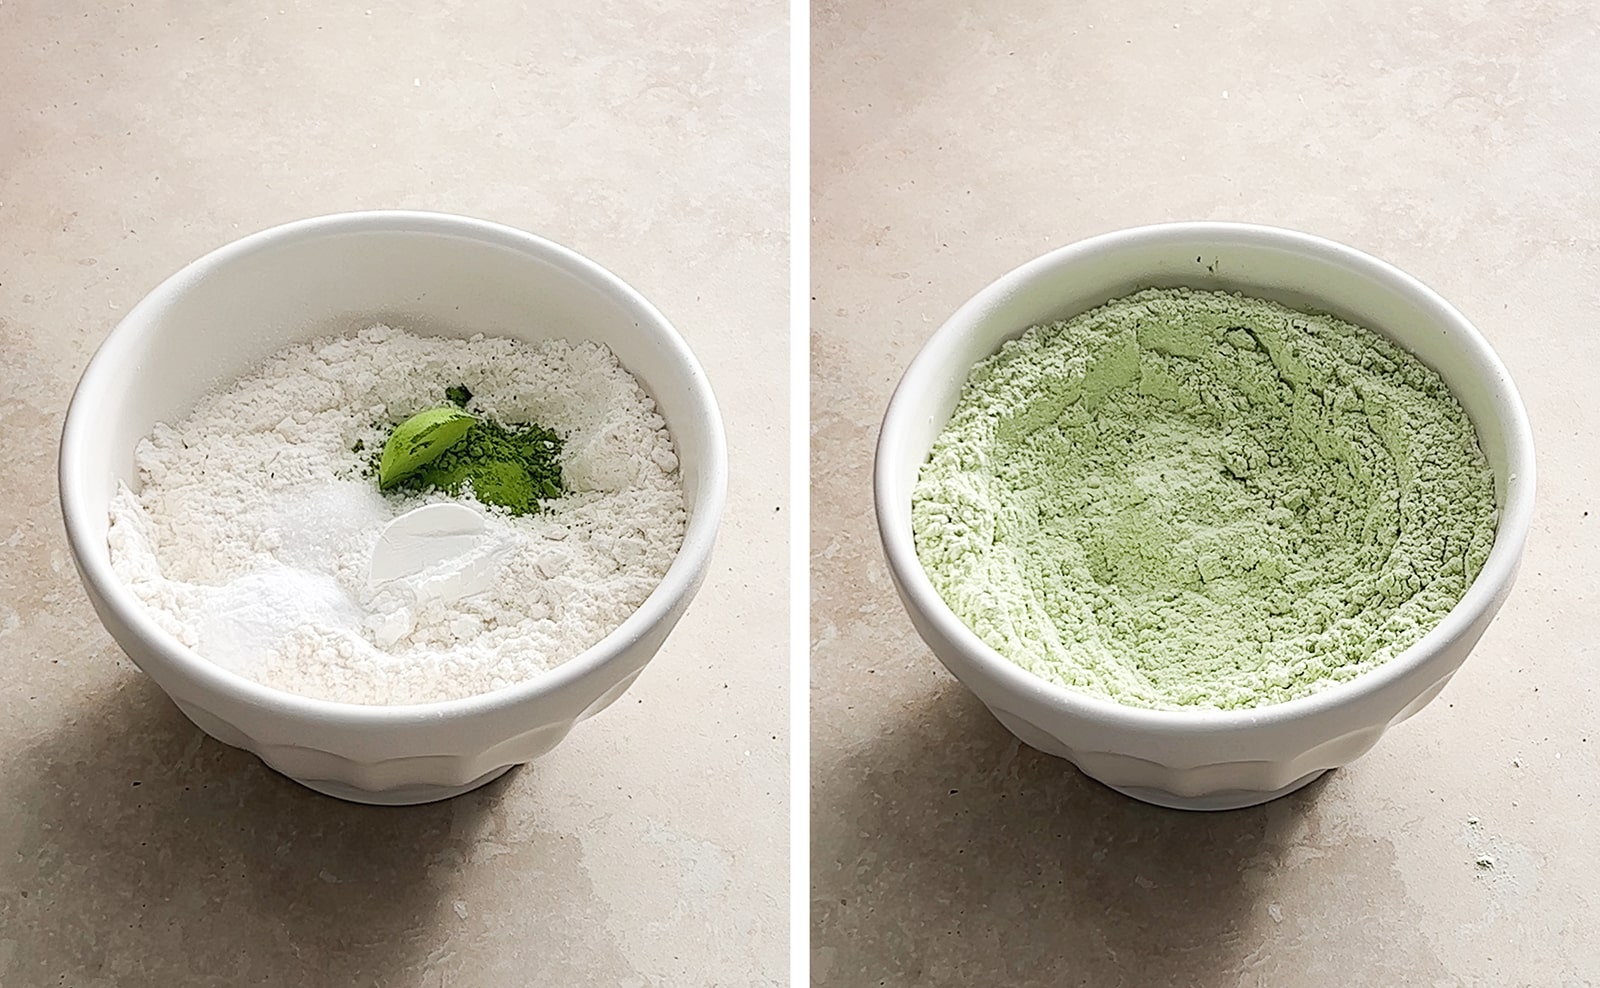 Left to right: dry ingredients in a bowl, dry ingredients mixed into a green powder in a bowl.